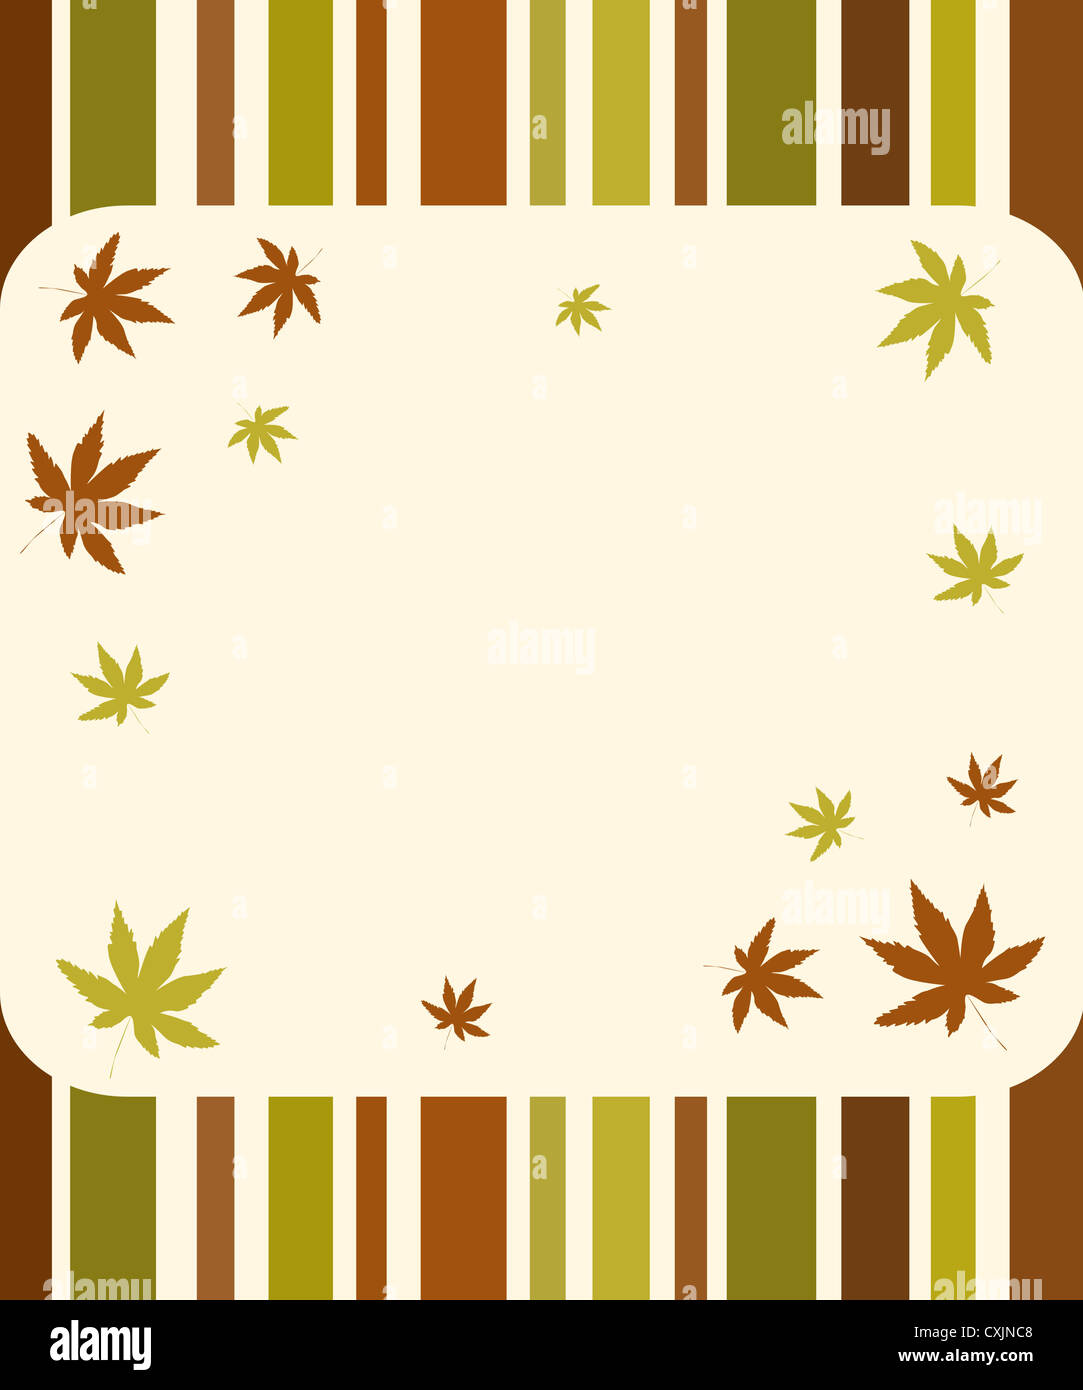 Autumn leaves frame with stripes Stock Photo